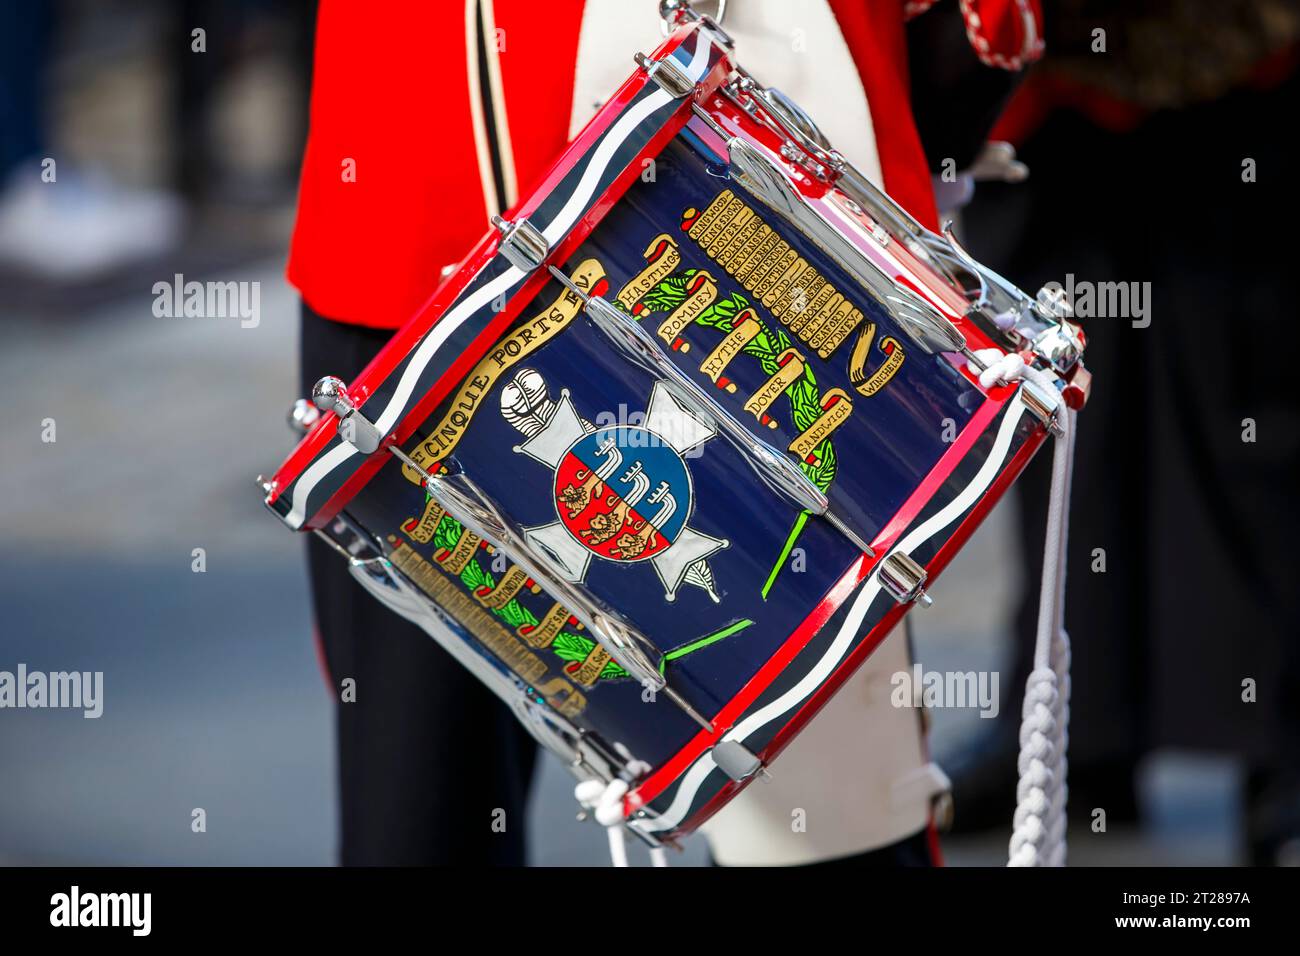 Das 1. Cinque Ports Rifle Volunteer Drum Corps beim Pearly Kings and Queens Harvest Festival im Guildhall Yard, London, England. Stockfoto